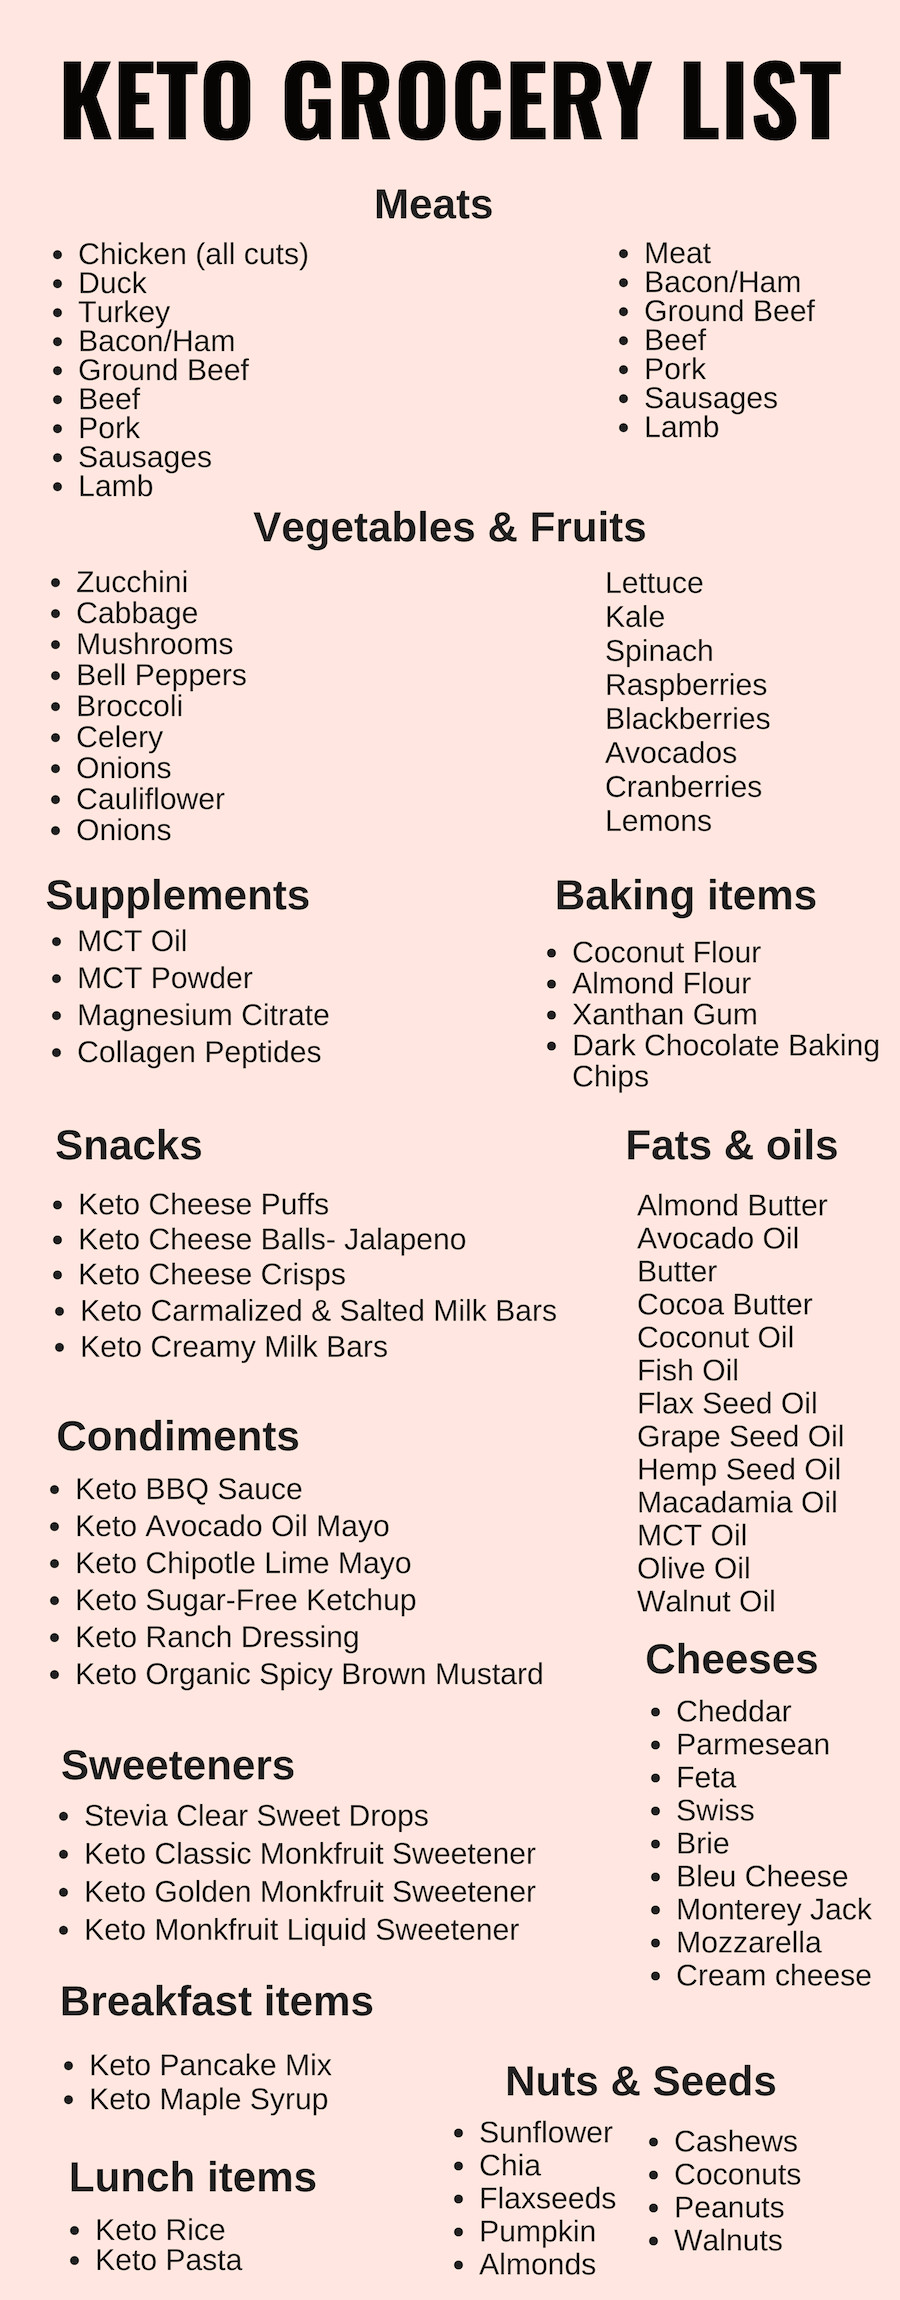 Keto Diet For Beginners Meal Plan Easy With Grocery List
 Keto Grocery List For Beginners – Simple Grocery List